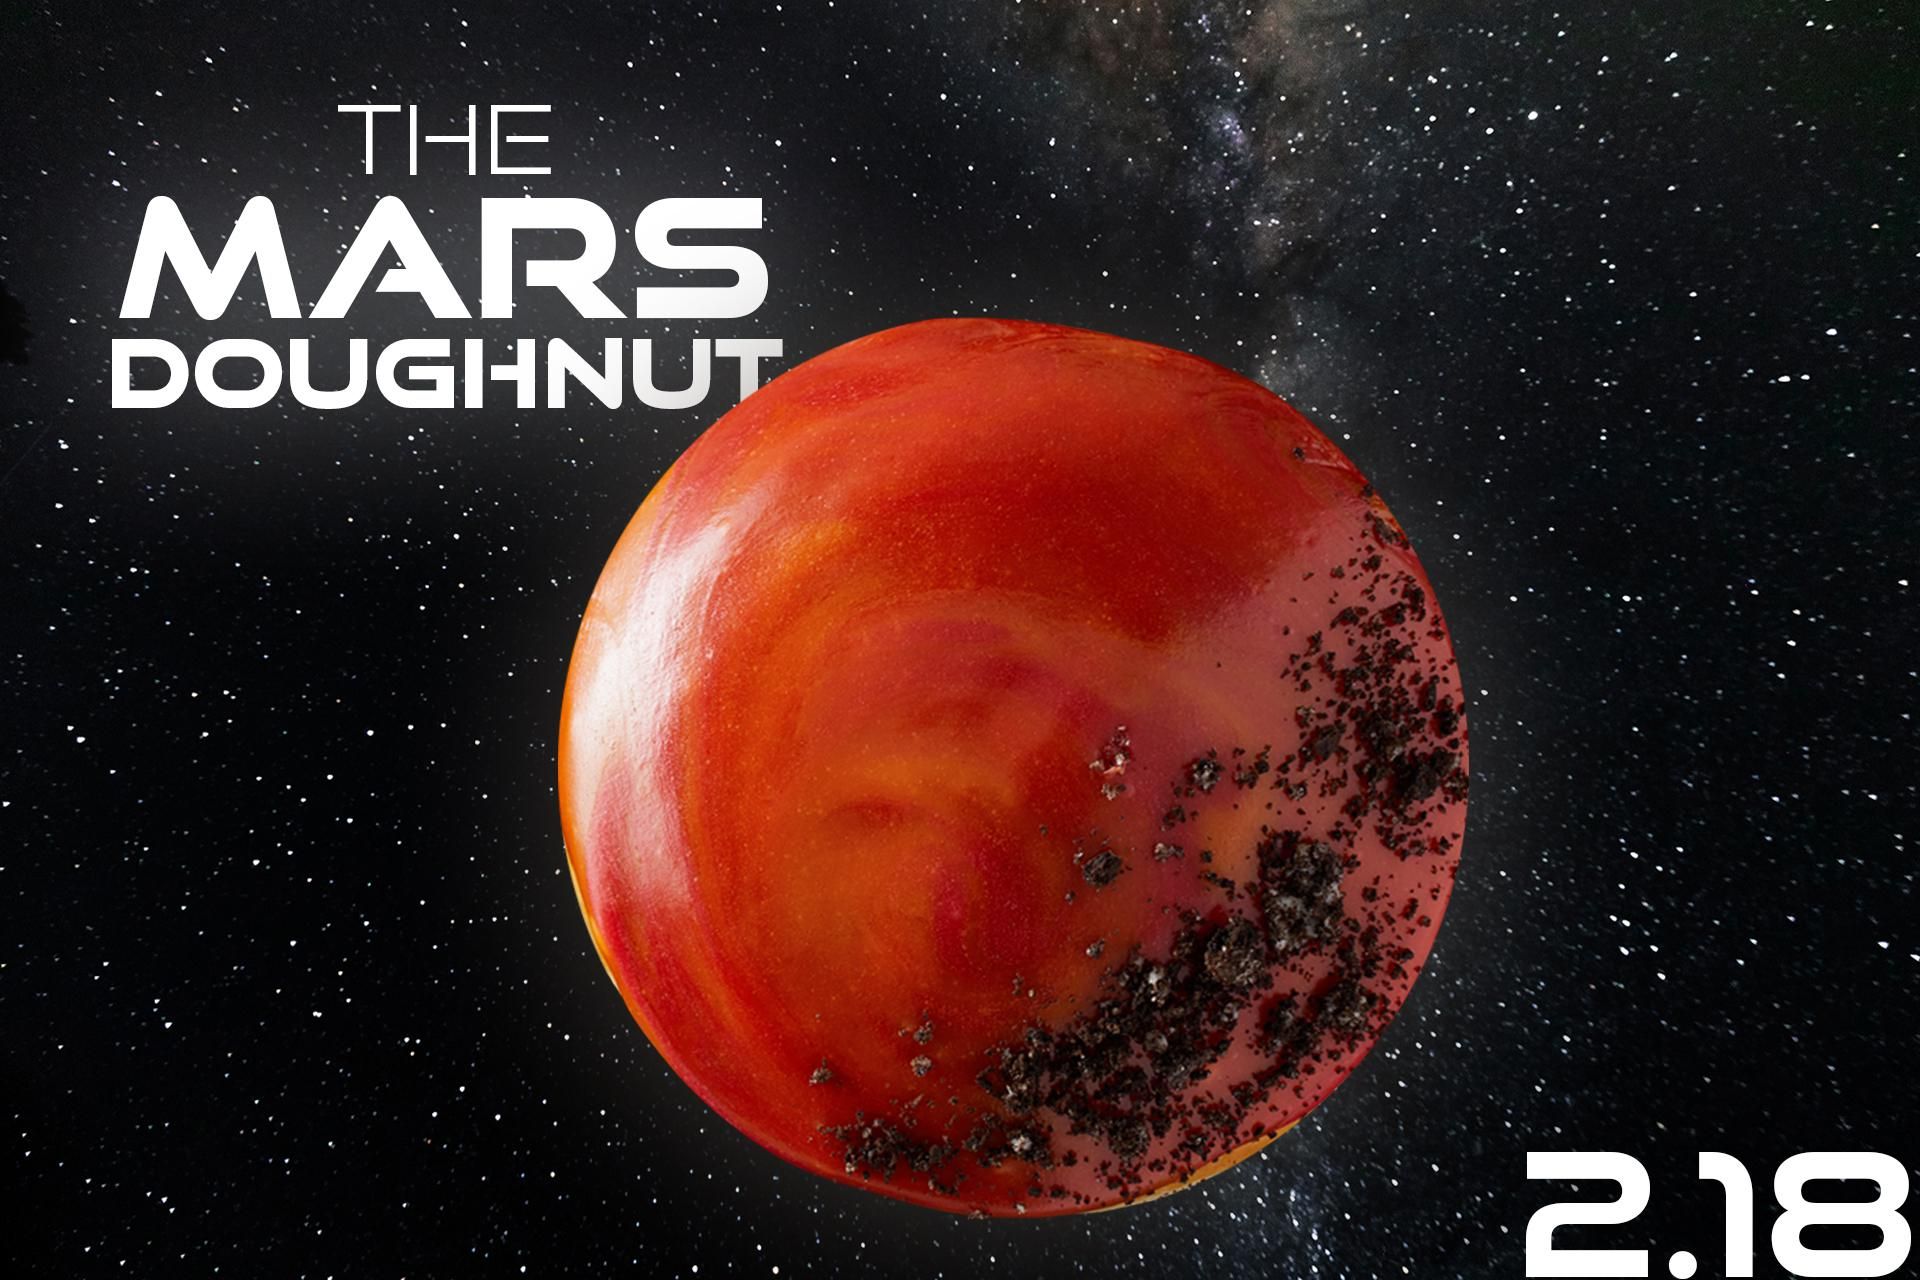 Krispy Kreme will have a Mars Doughnut for one day only